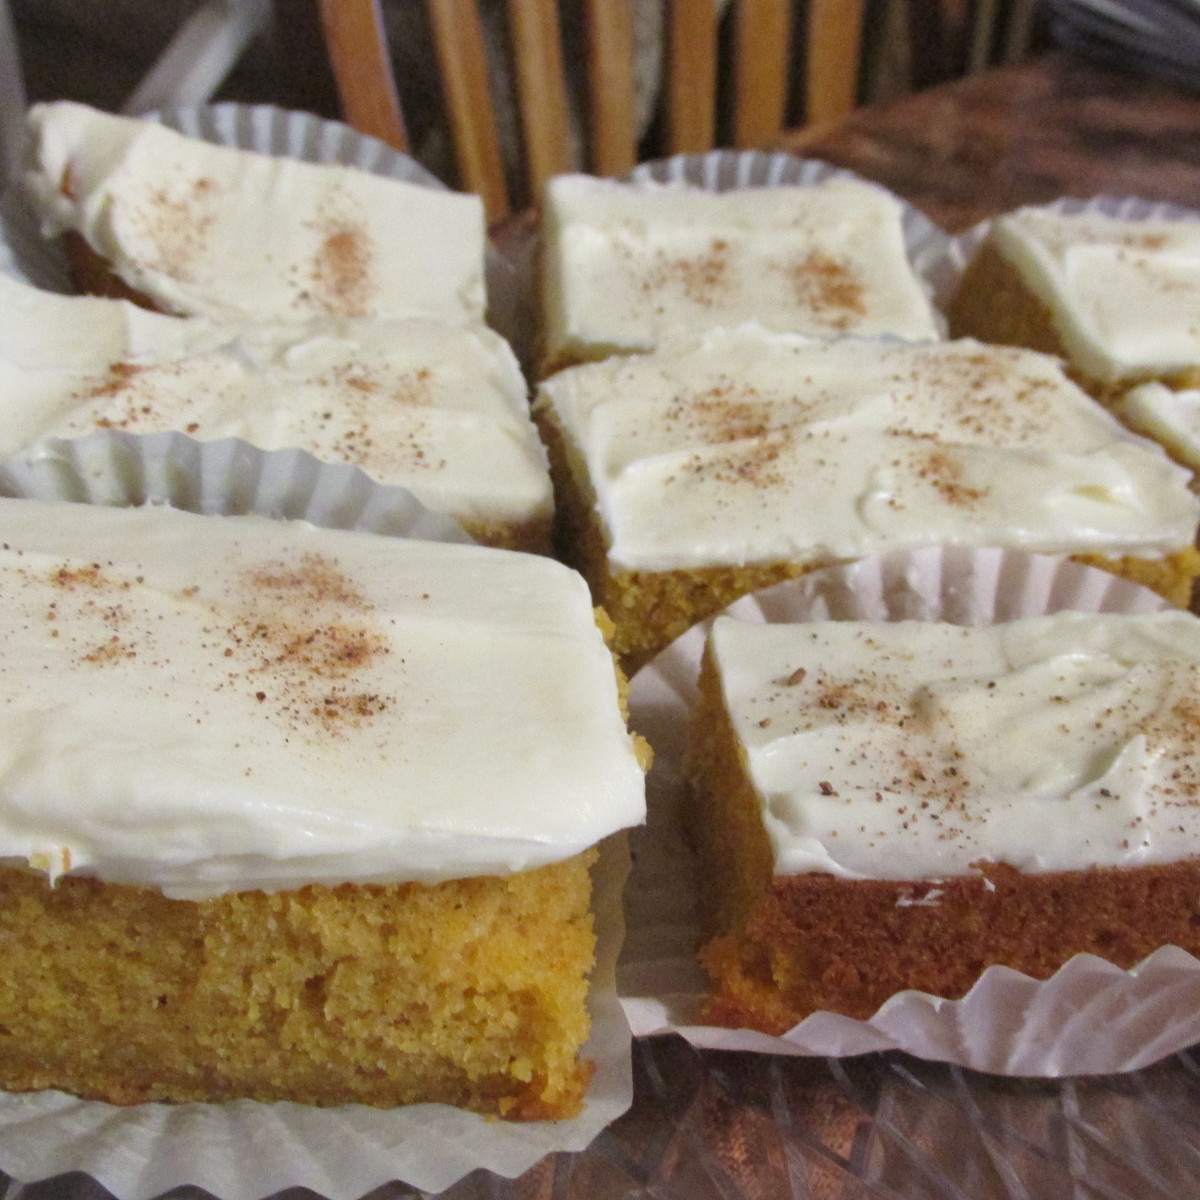 Pumpkin bars with cream cheese frosting ready to serve